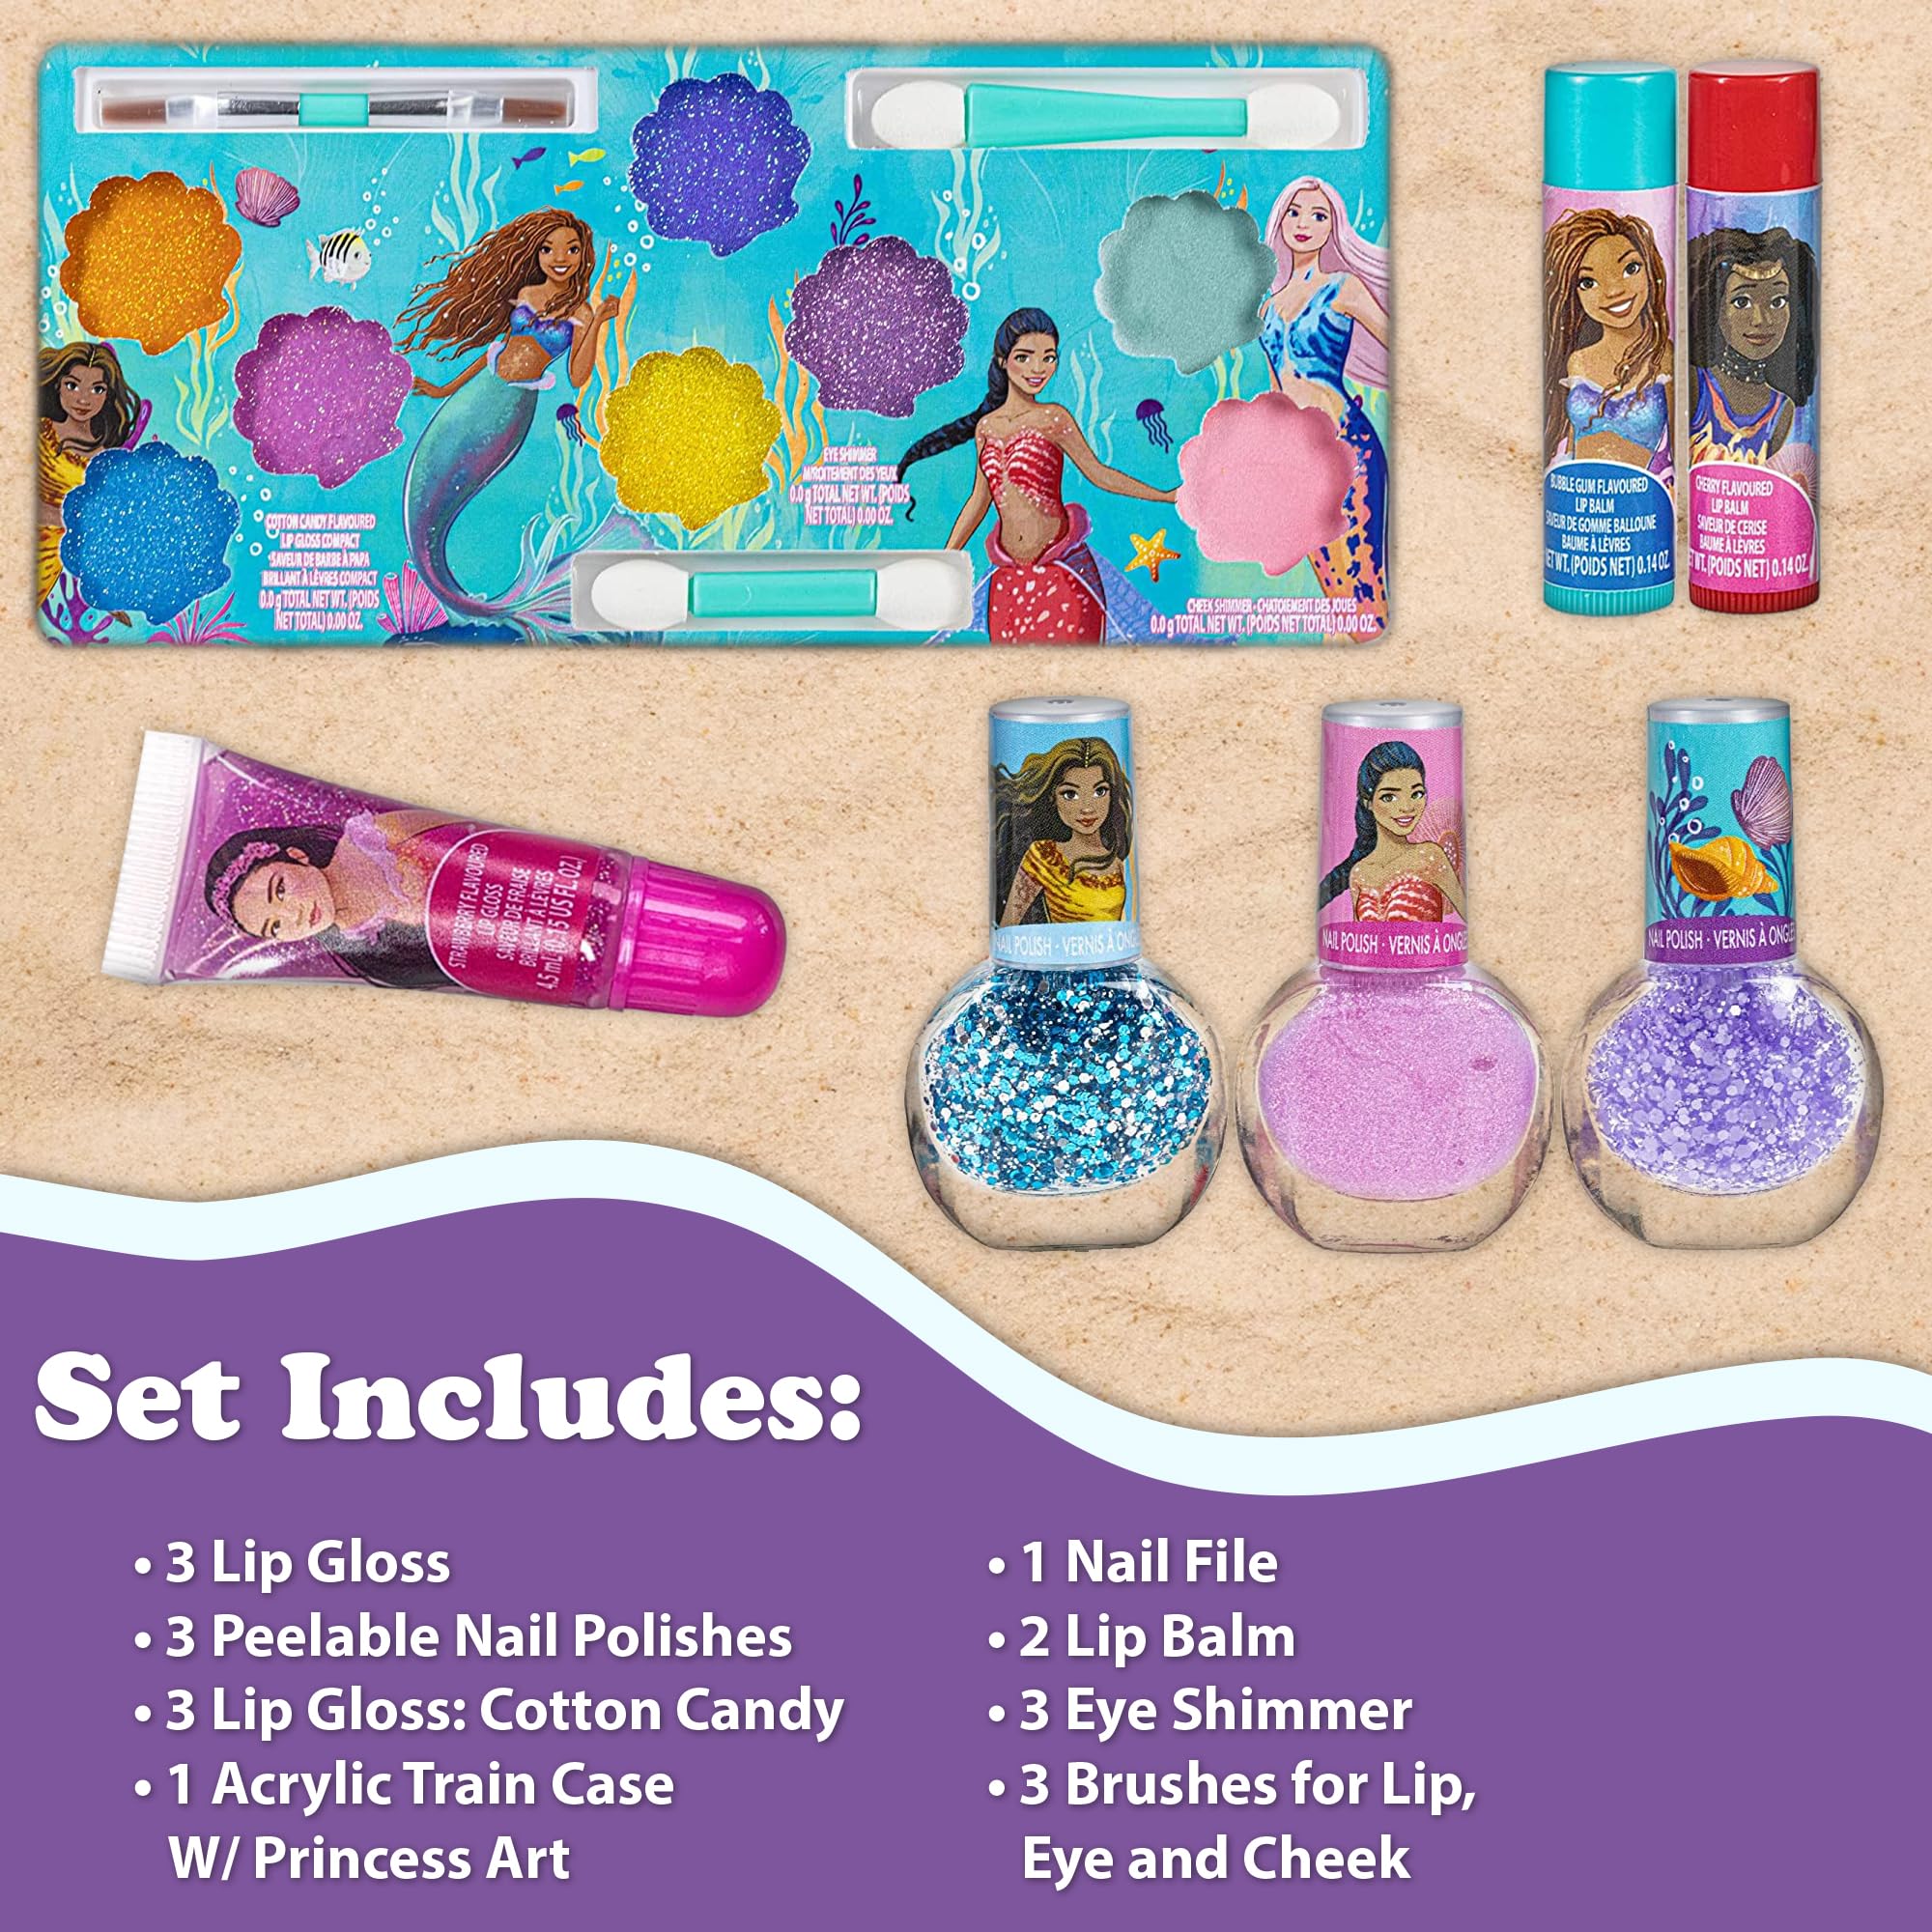 Little Mermaid Train Case Beauty Set, Kids Makeup Kit for Girls, Real Washable Toy Makeup Set, Play Makeup, Pretend Play, Party Favor, Birthday, Toys Ages 3 4 5 6 7 8 9 10 11 12